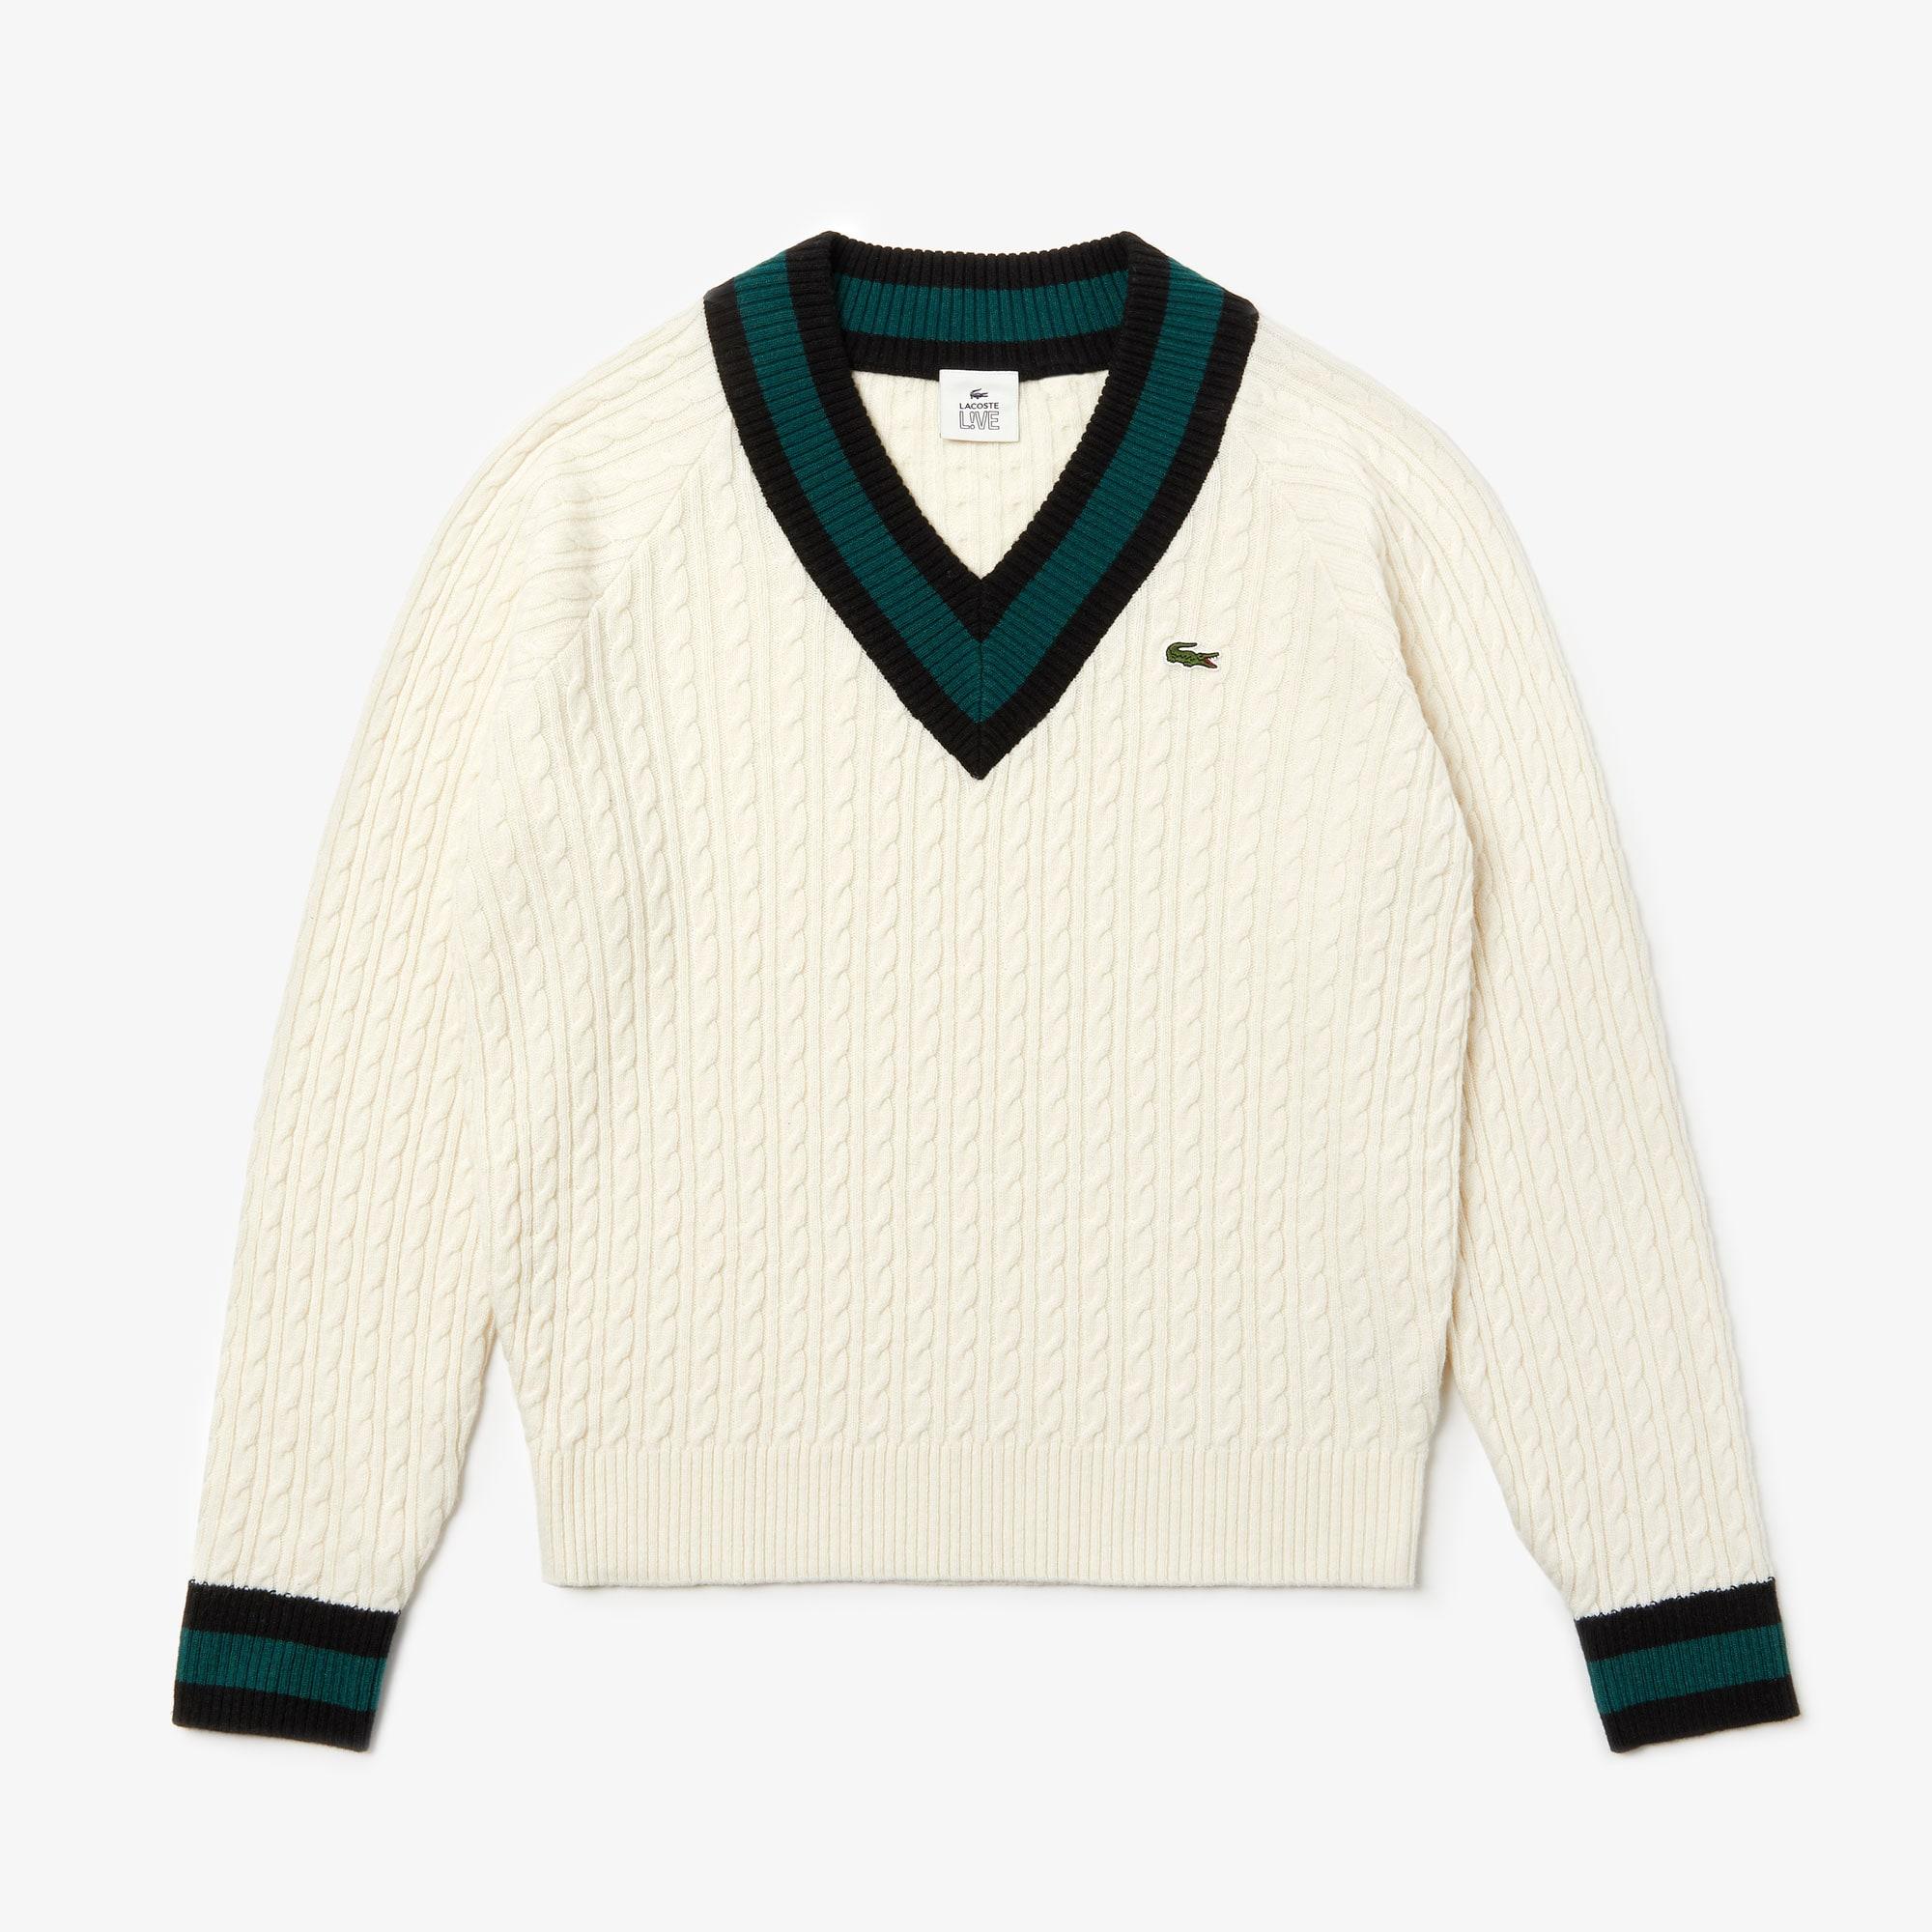 Lacoste Unisex Live Cable Knit Wool 